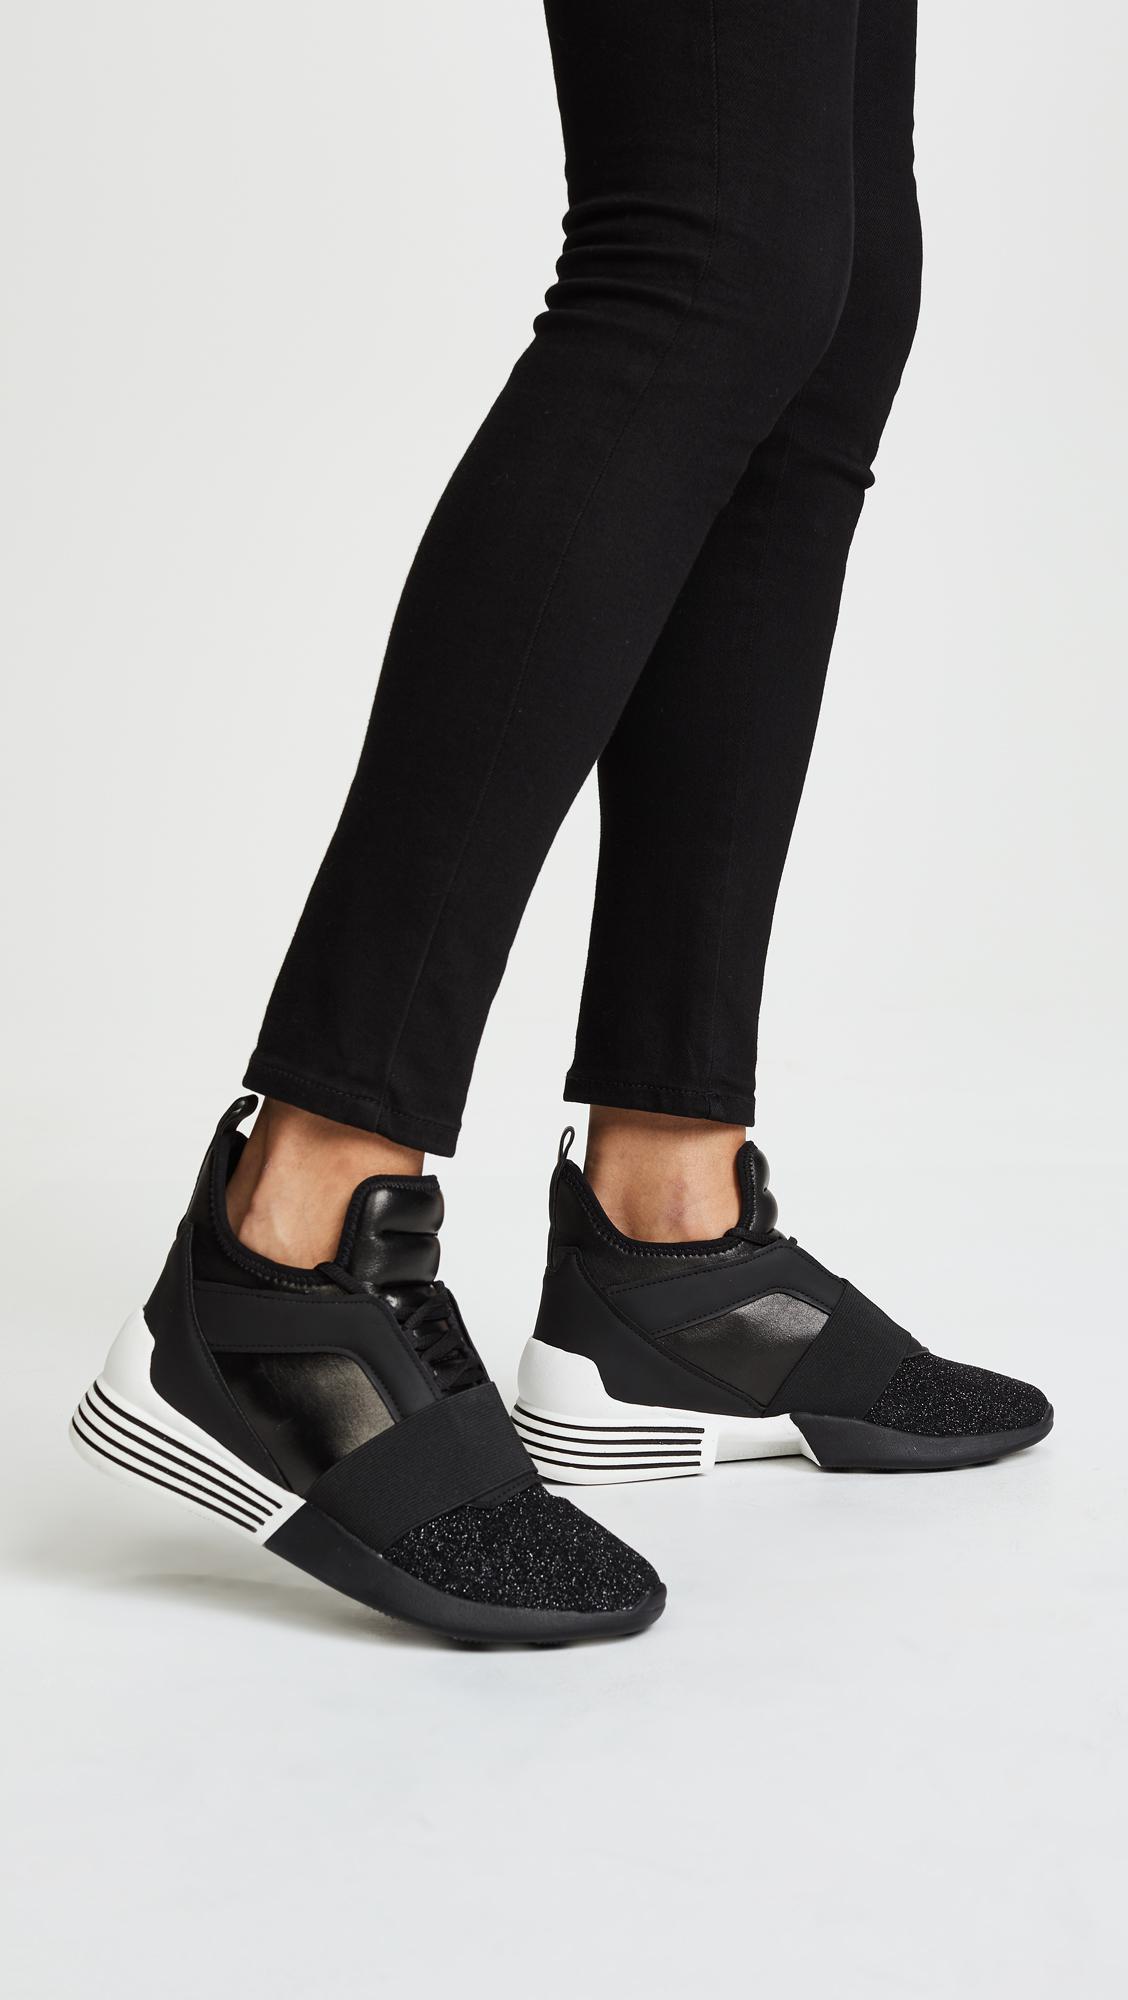 Lyst - Kendall + Kylie Braydin Sparkle Sneakers in Black